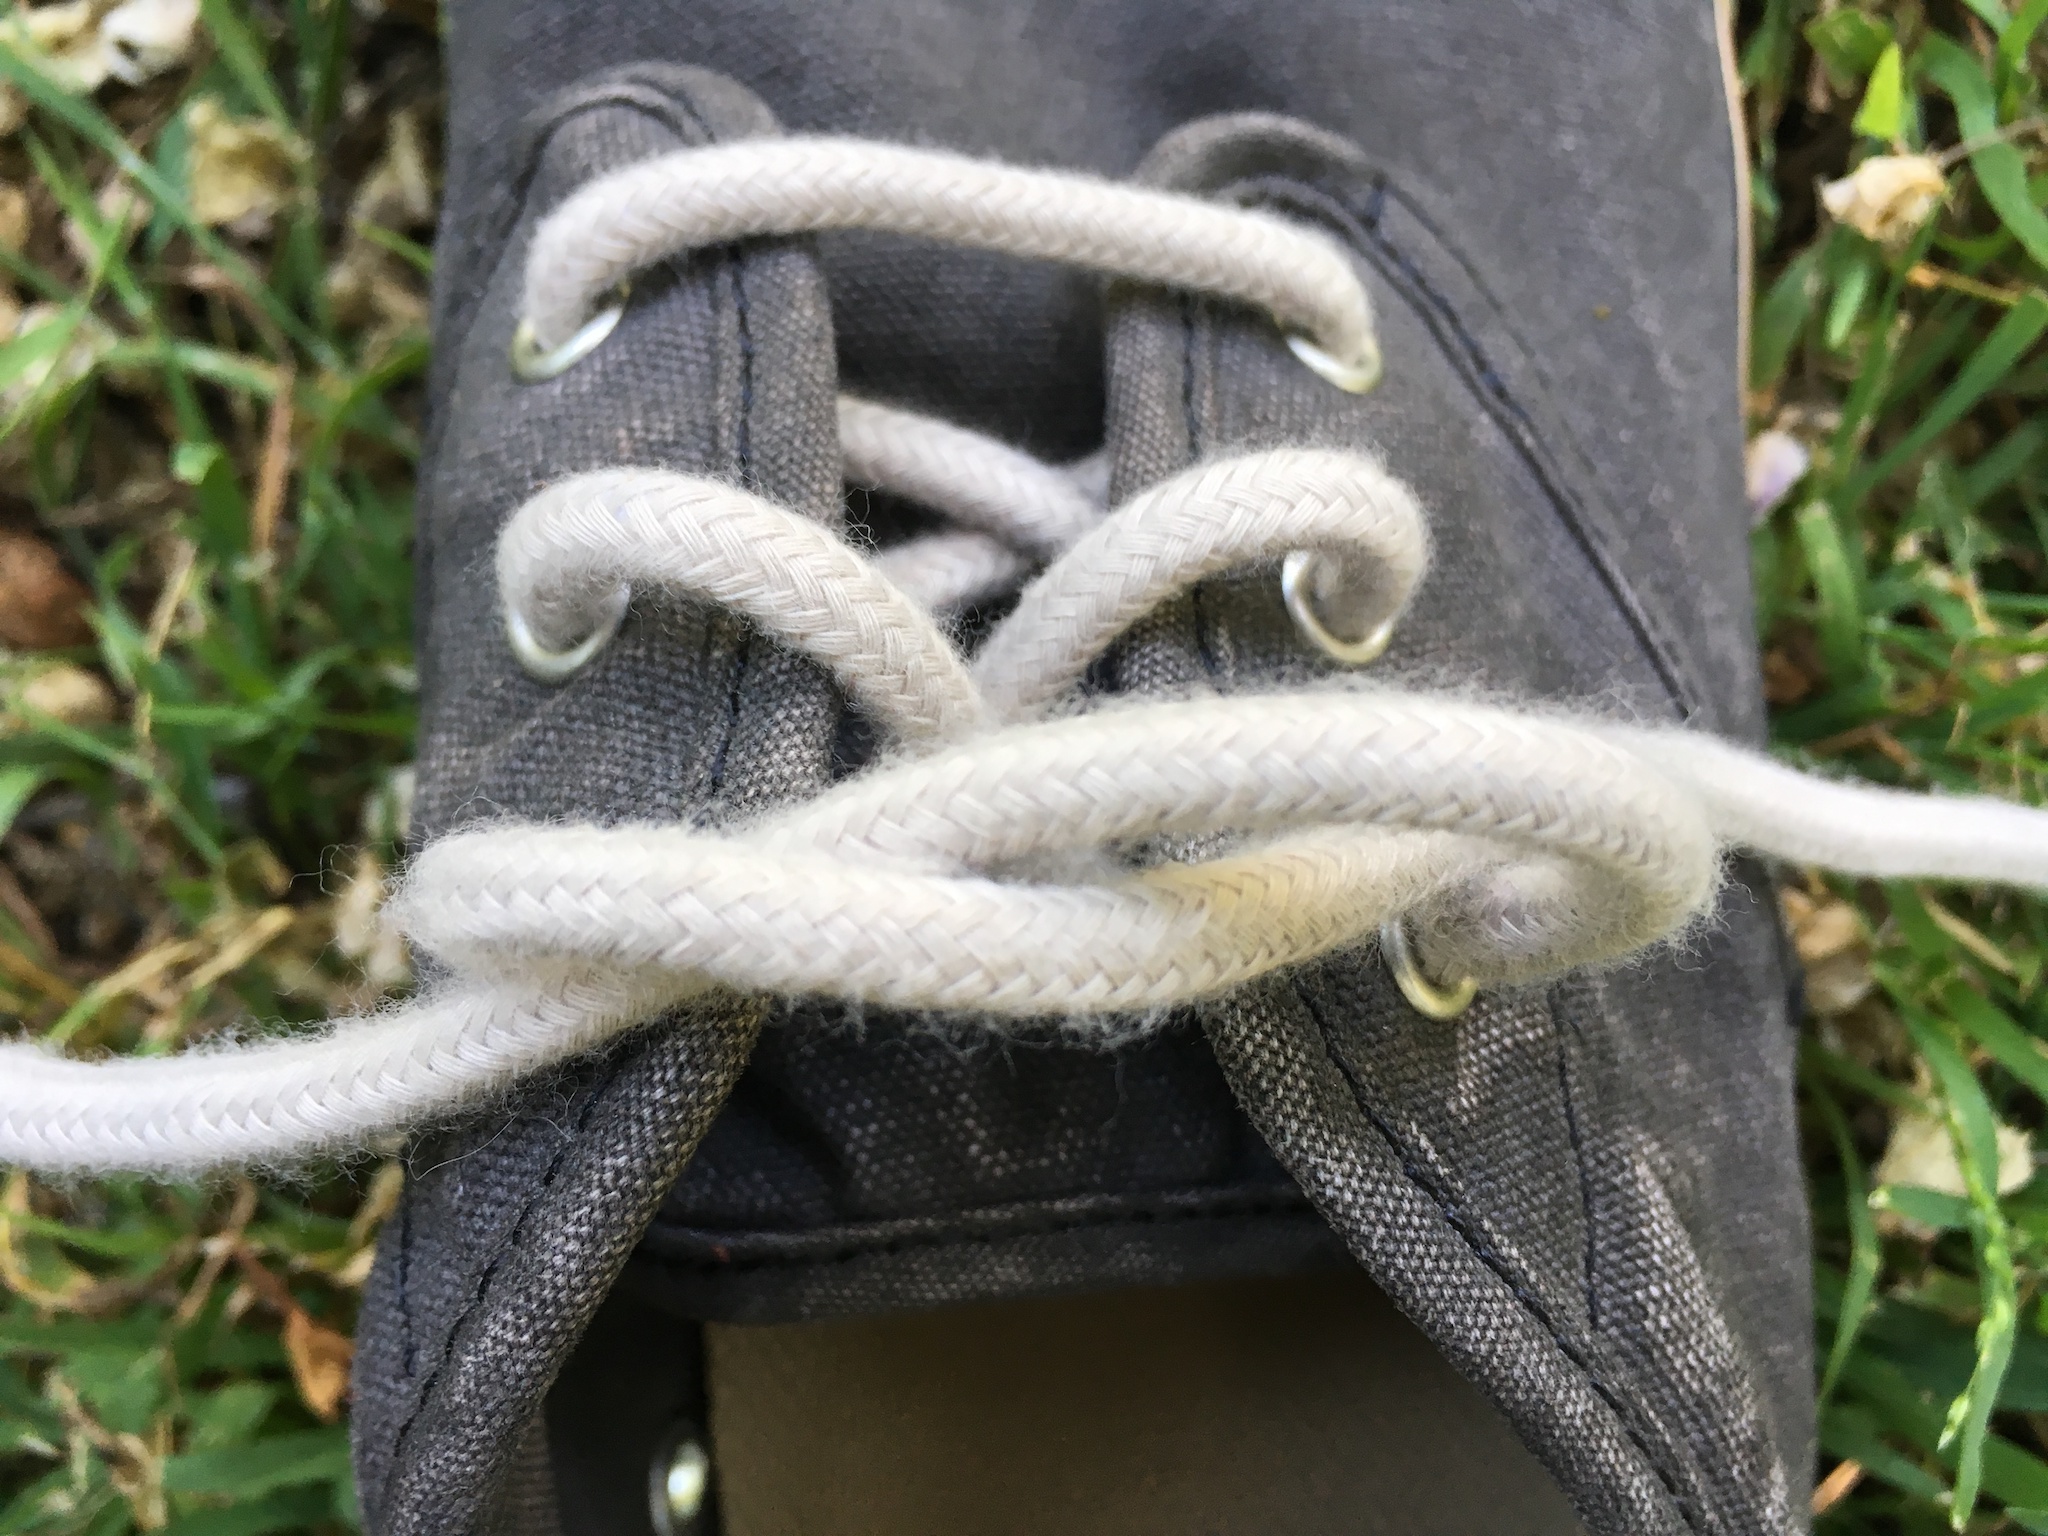 Crossing the laces